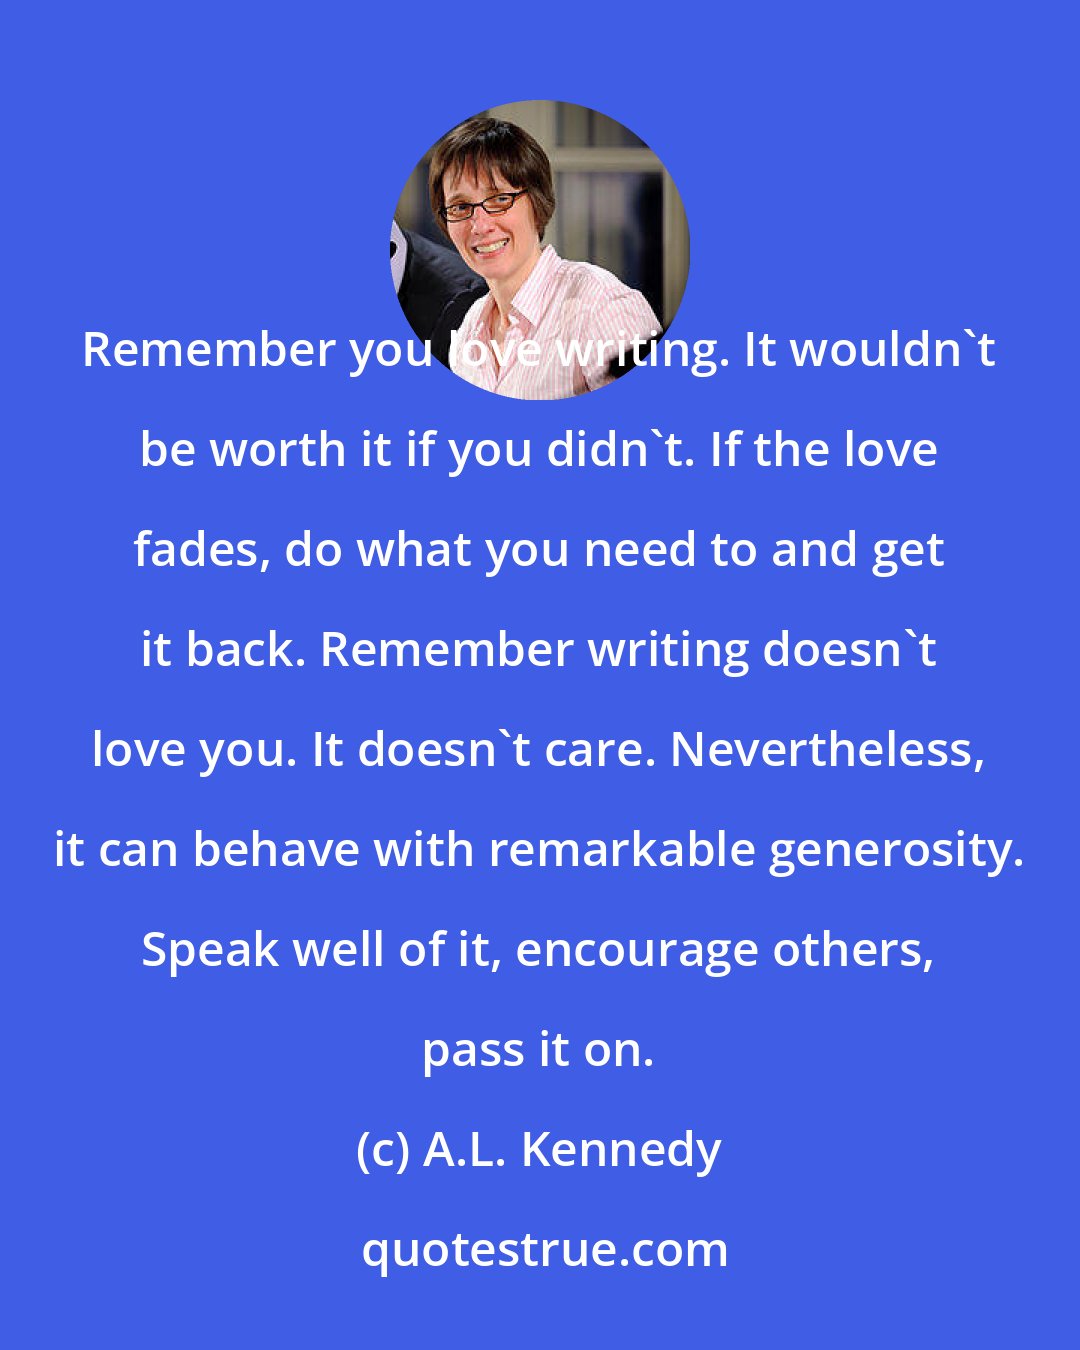 A.L. Kennedy: Remember you love writing. It wouldn't be worth it if you didn't. If the love fades, do what you need to and get it back. Remember writing doesn't love you. It doesn't care. Nevertheless, it can behave with remarkable generosity. Speak well of it, encourage others, pass it on.